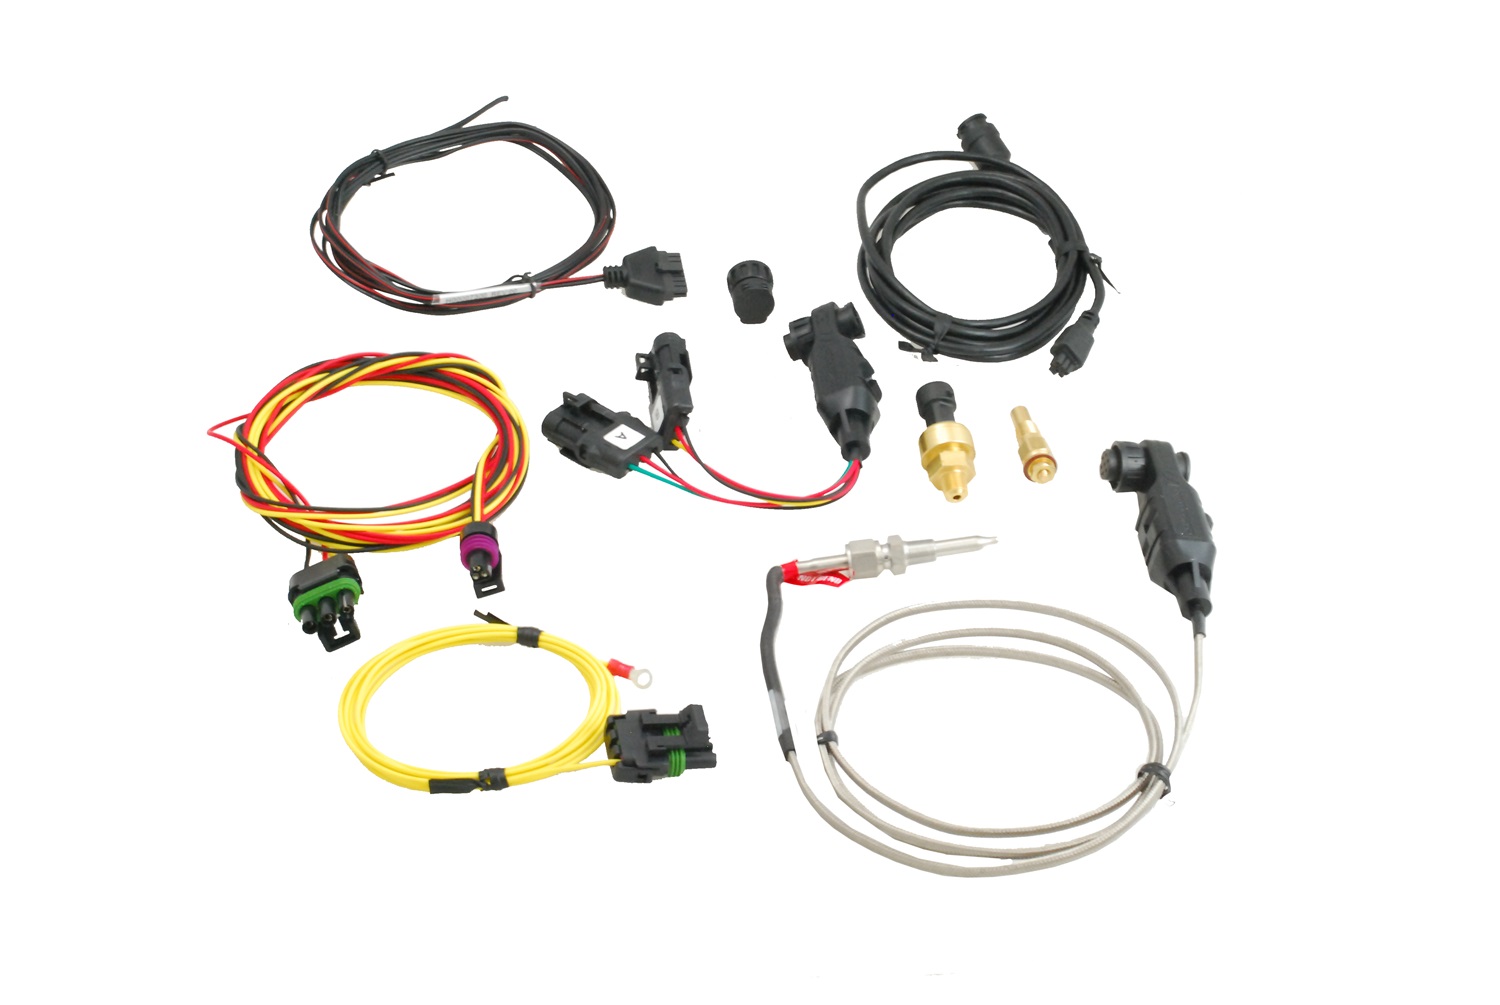 Edge Products Edge Products 98614 Edge Accessory System 12 Volt Power Supply Kit